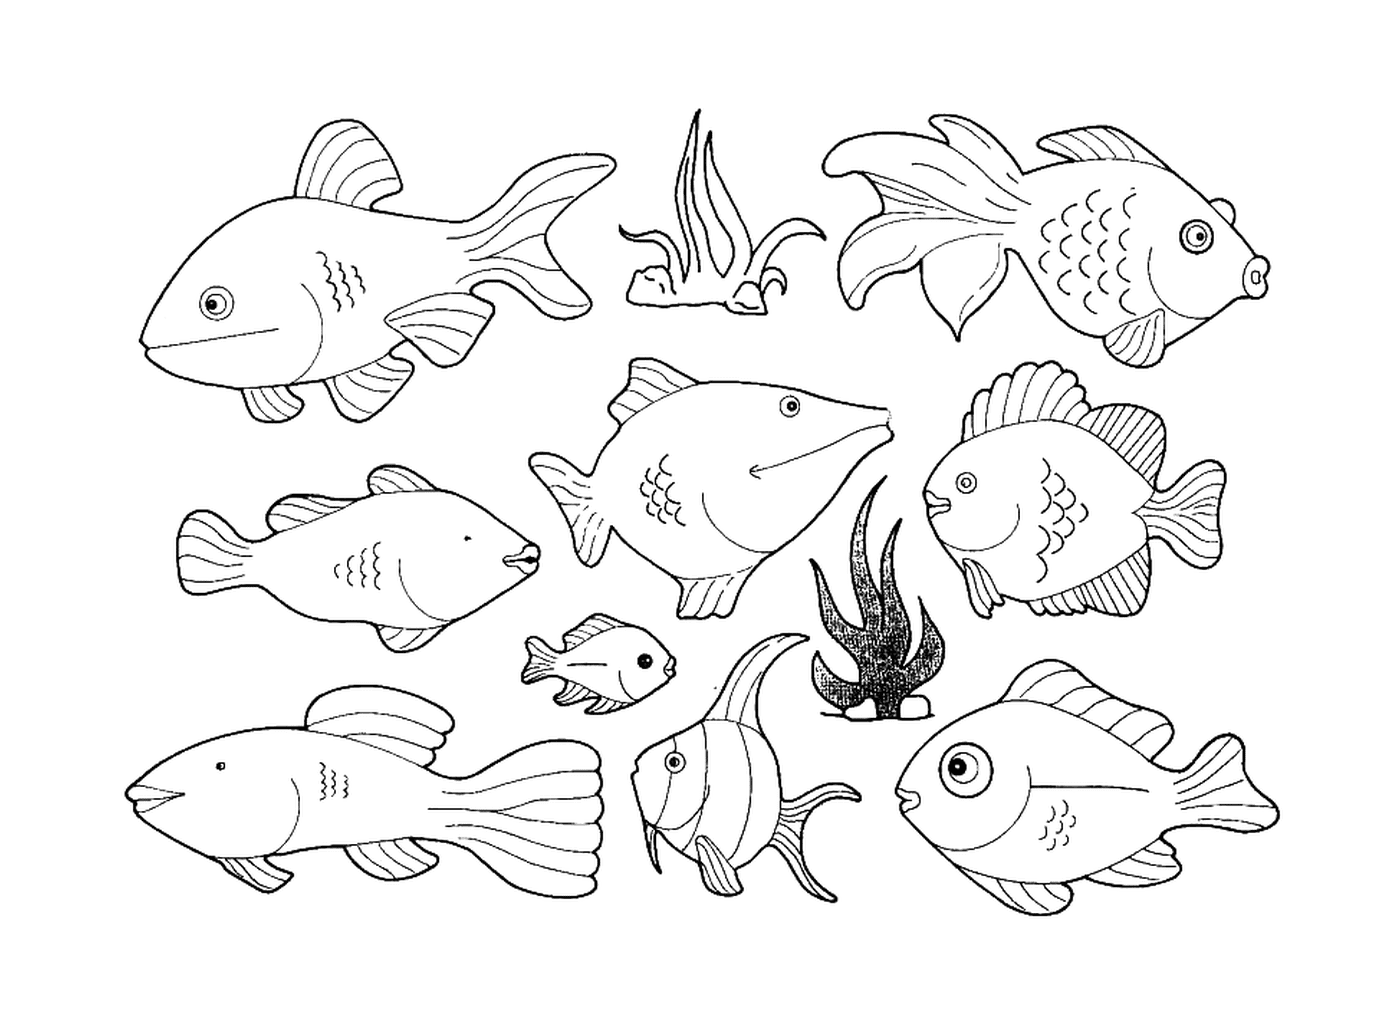  Many types of fish on this page 